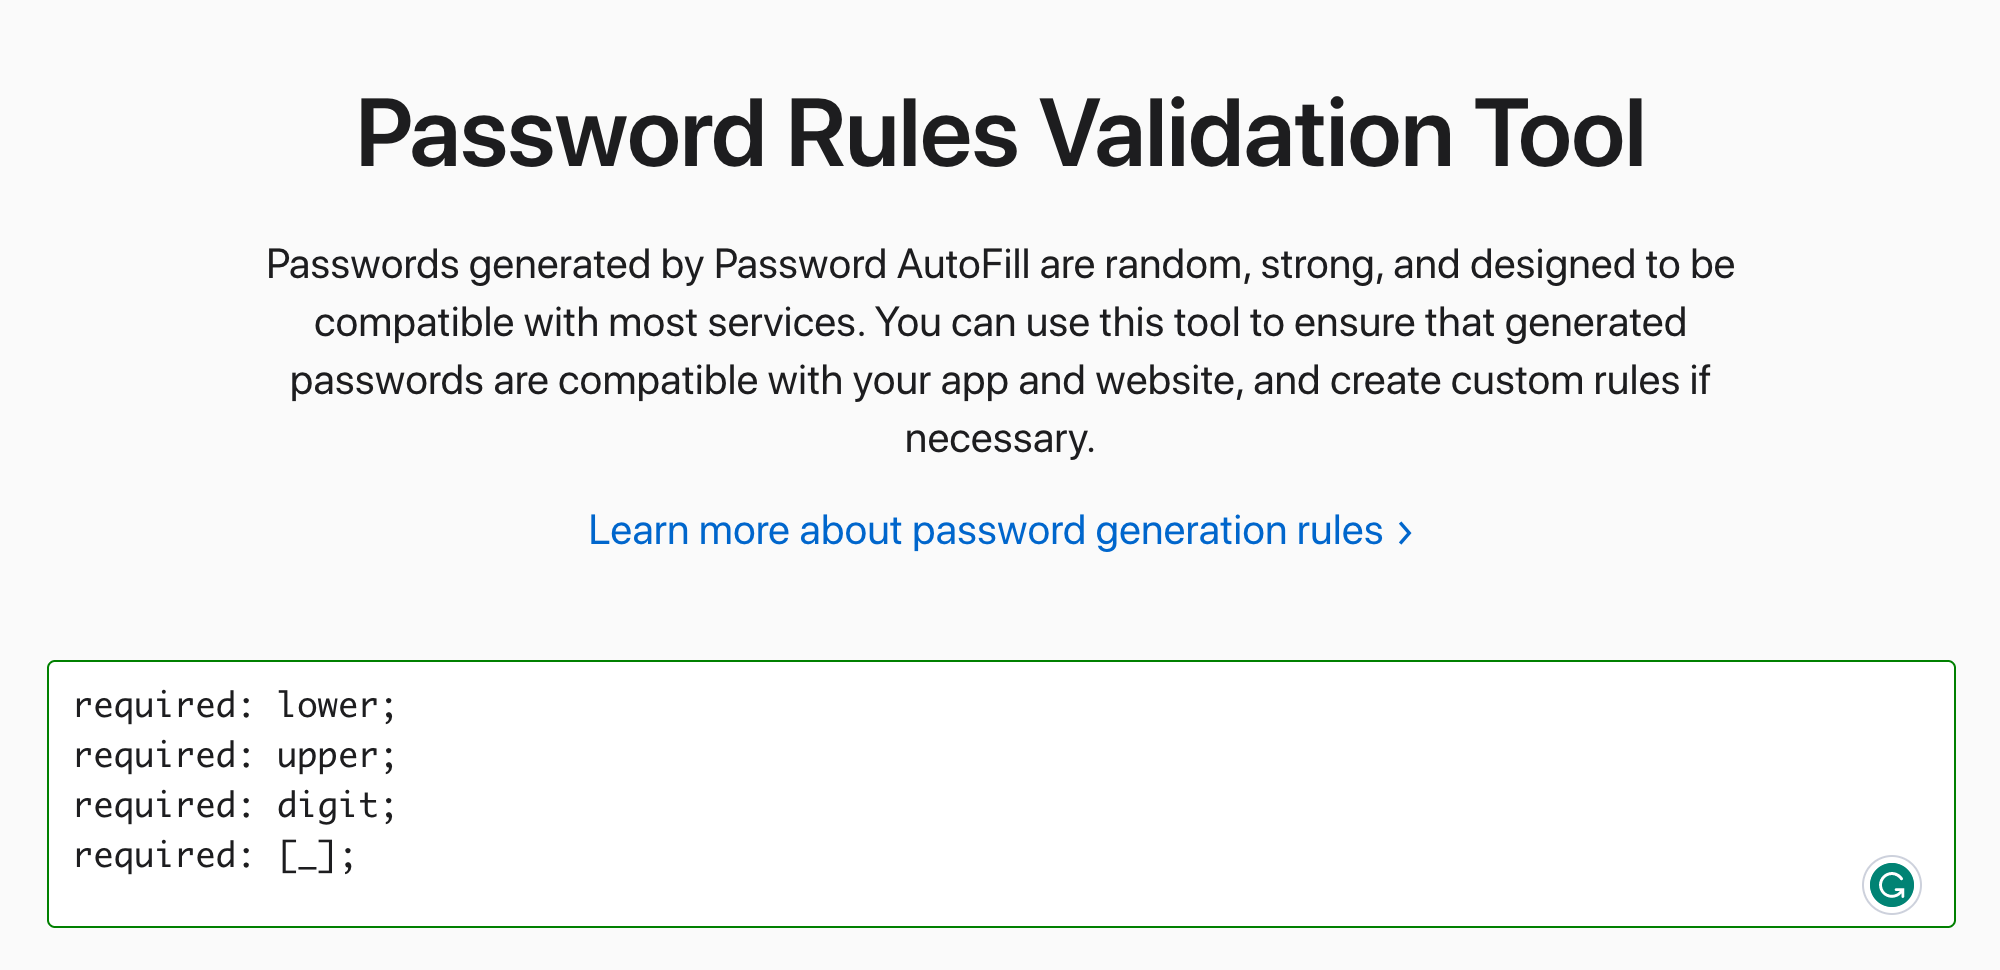 Password Rules Validation Tool — Passwords generated by Password AutoFill are random, strong, and designed to be compatible with most services. You can use this tool to ensure that generated passwords are compatible with your app and website, and create custom rules if necessary.